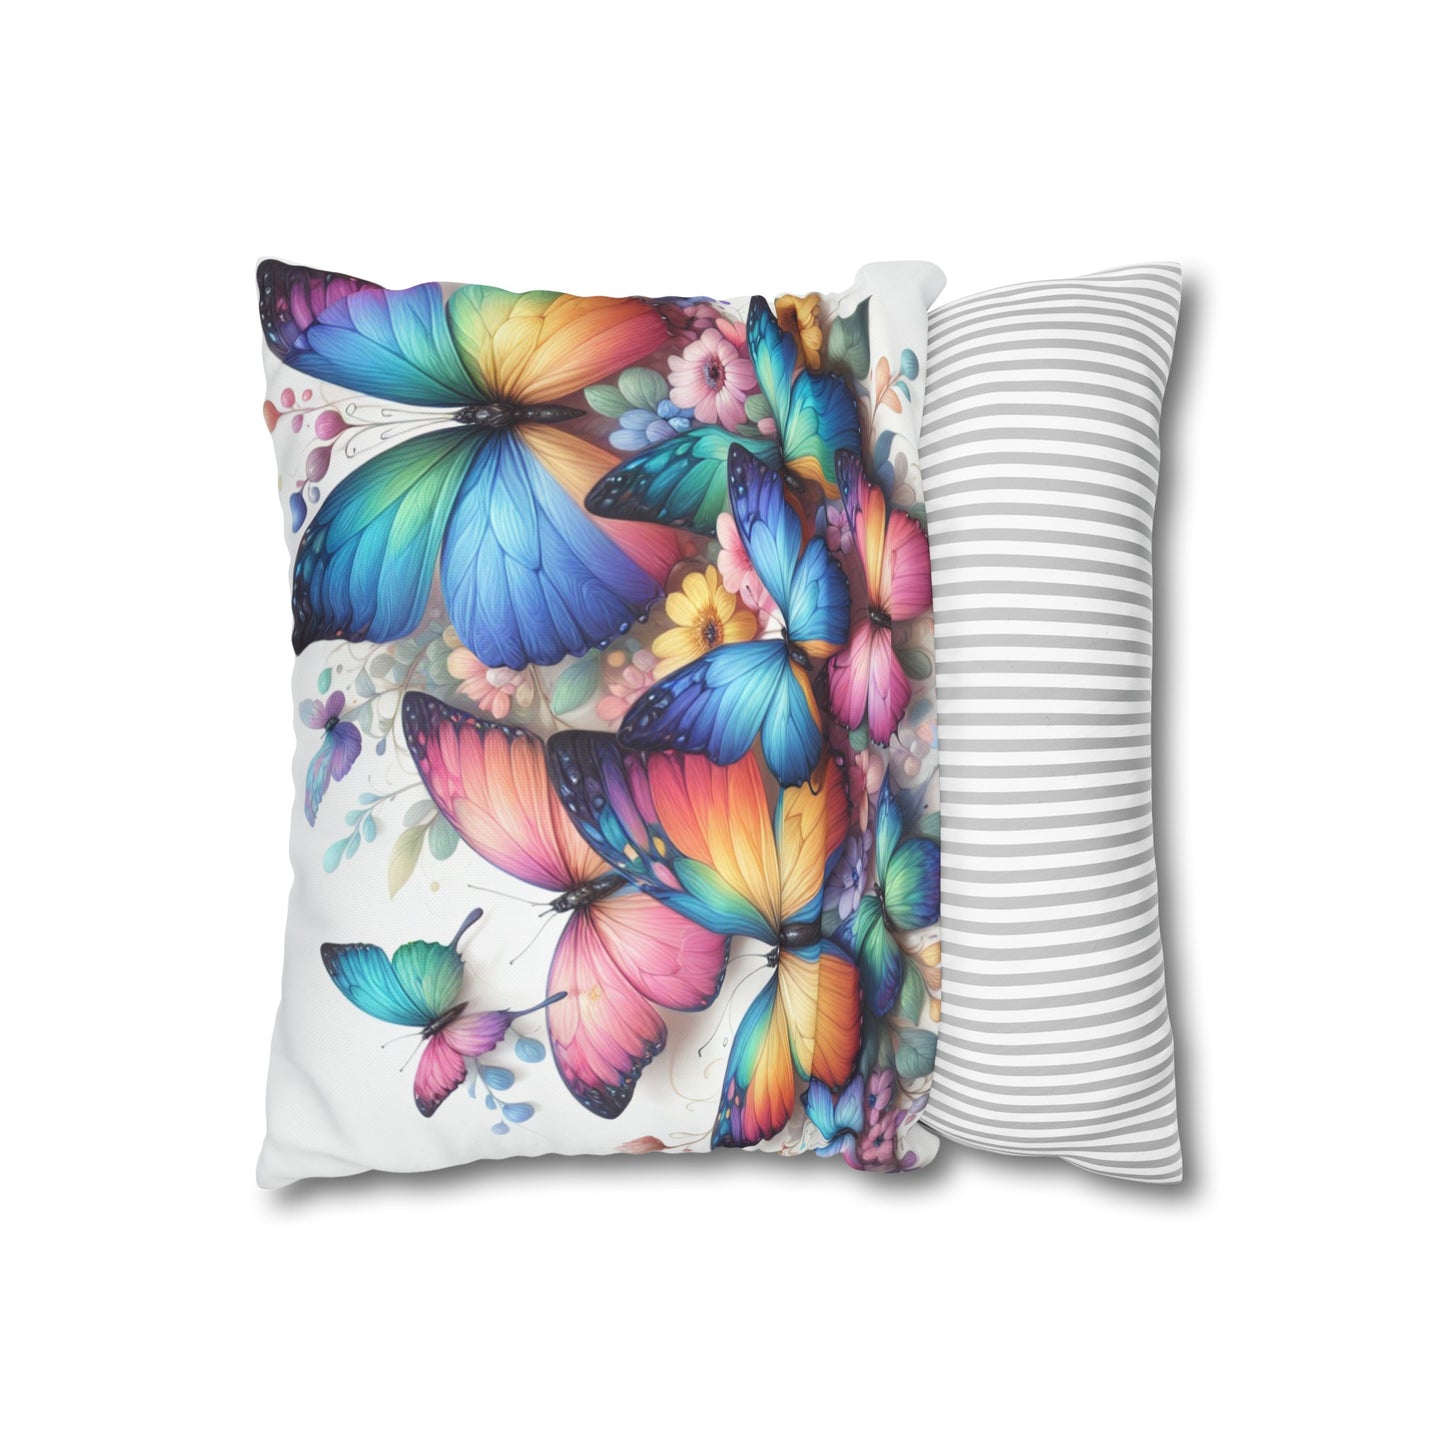 Rainbow Butterflies and Flowers Cushion Cover